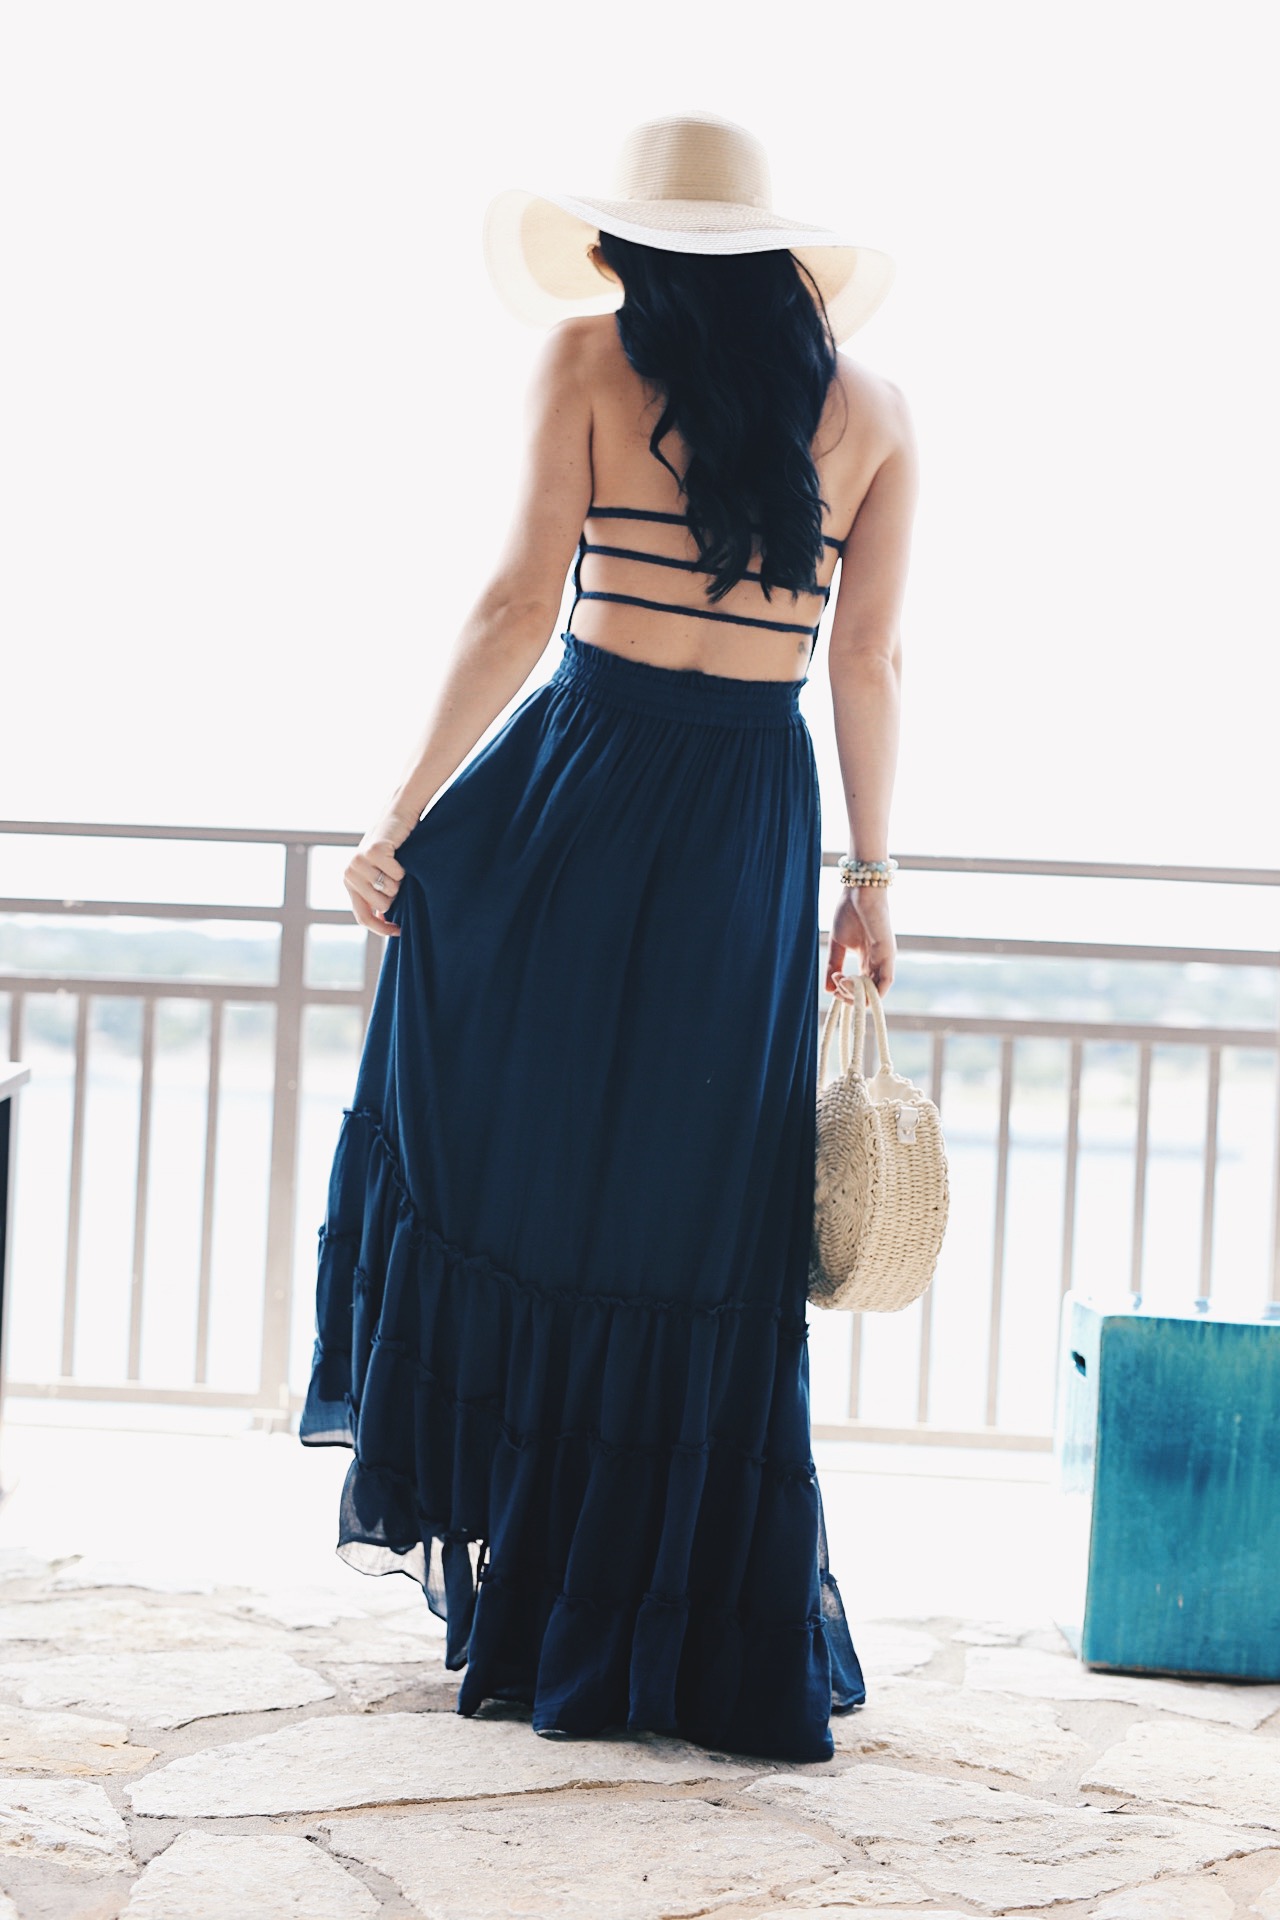 Maxi Dress and Hat | summer style for women | summer fashion for women | summer outfit ideas for women || DTK Austin #fashion #style #womensoutfits #maxidress #summerhat #summerfashion #summerstyle #summeroutfits - {Best Staycation Near Austin - Lakeway Resort & Spa} by popular Austin blogger, Dressed to Kill